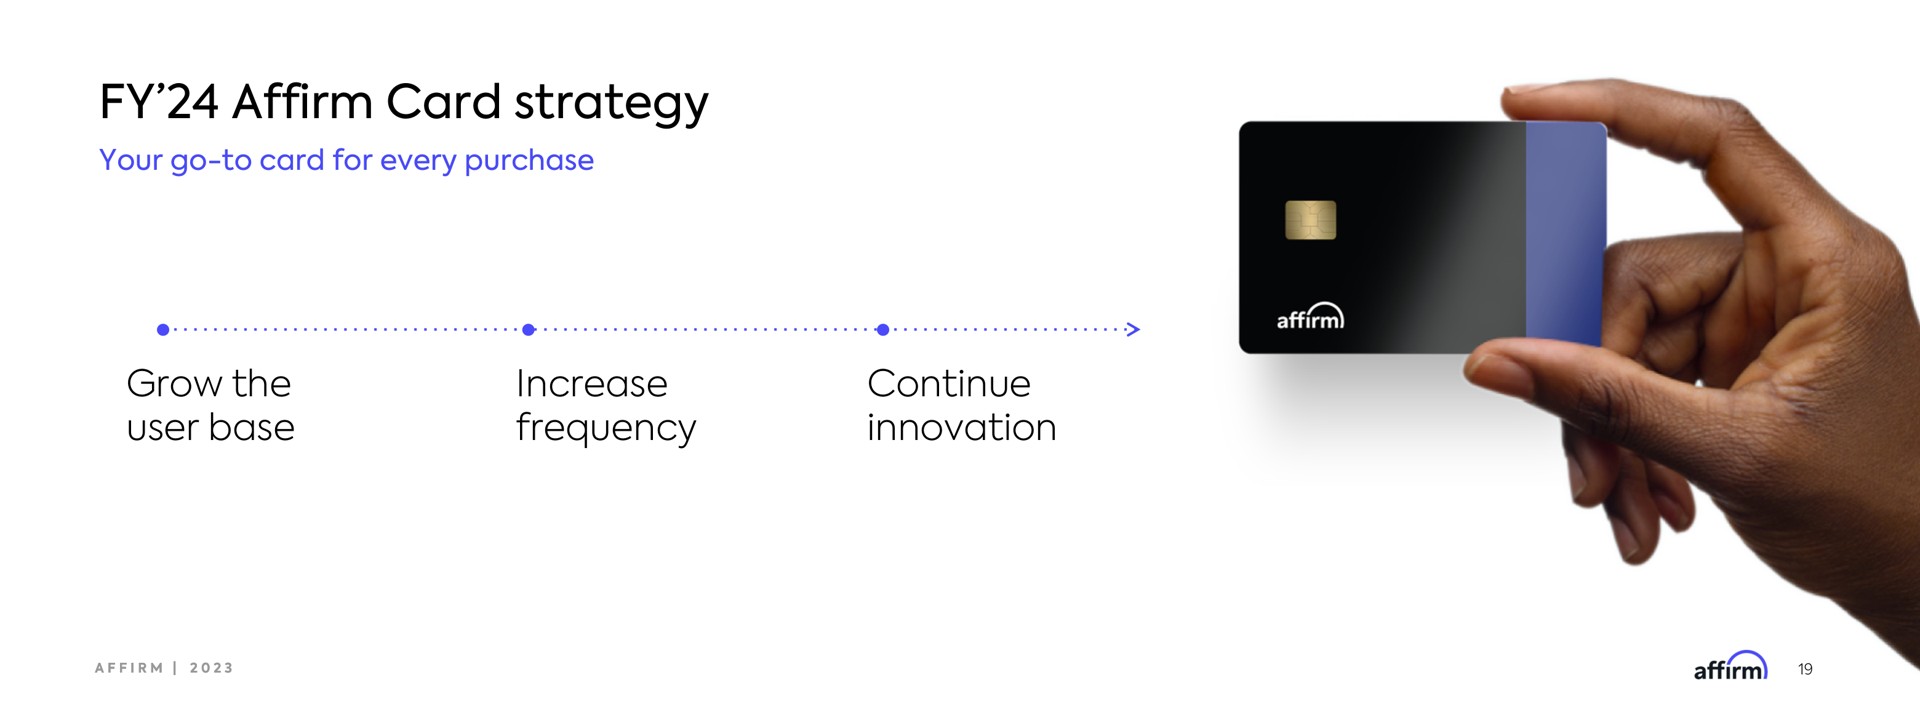 affirm card strategy grow the user base increase frequency continue innovation | Affirm